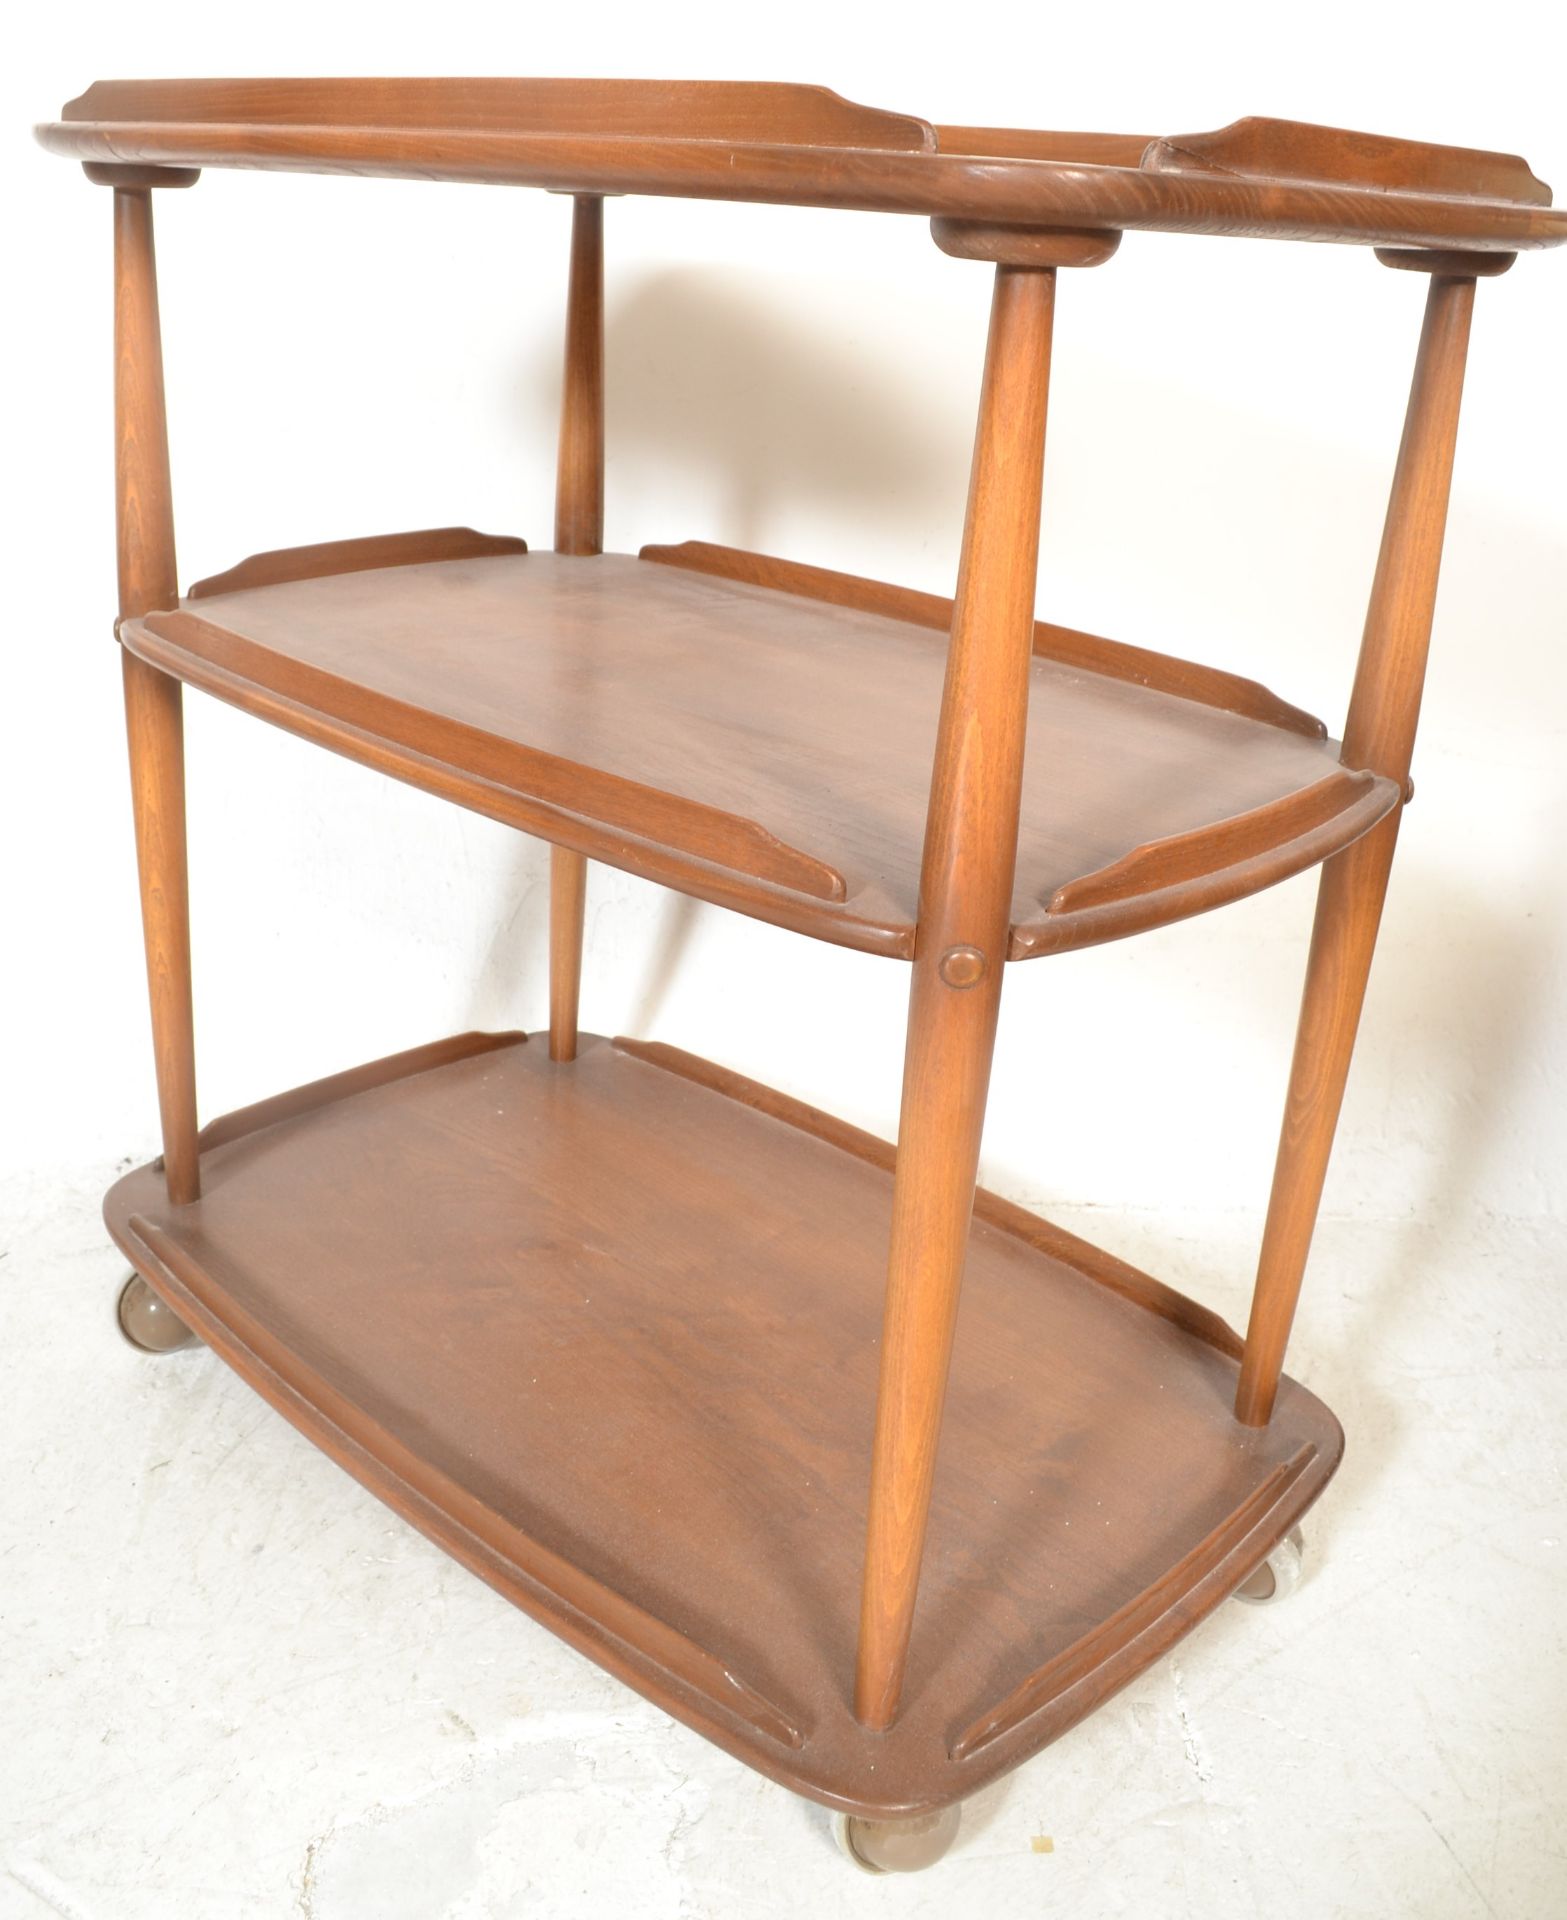 A vintage 20th century Ercol Golden Dawn 3 tier butlers serving buffet trolley. The elm tiers raised